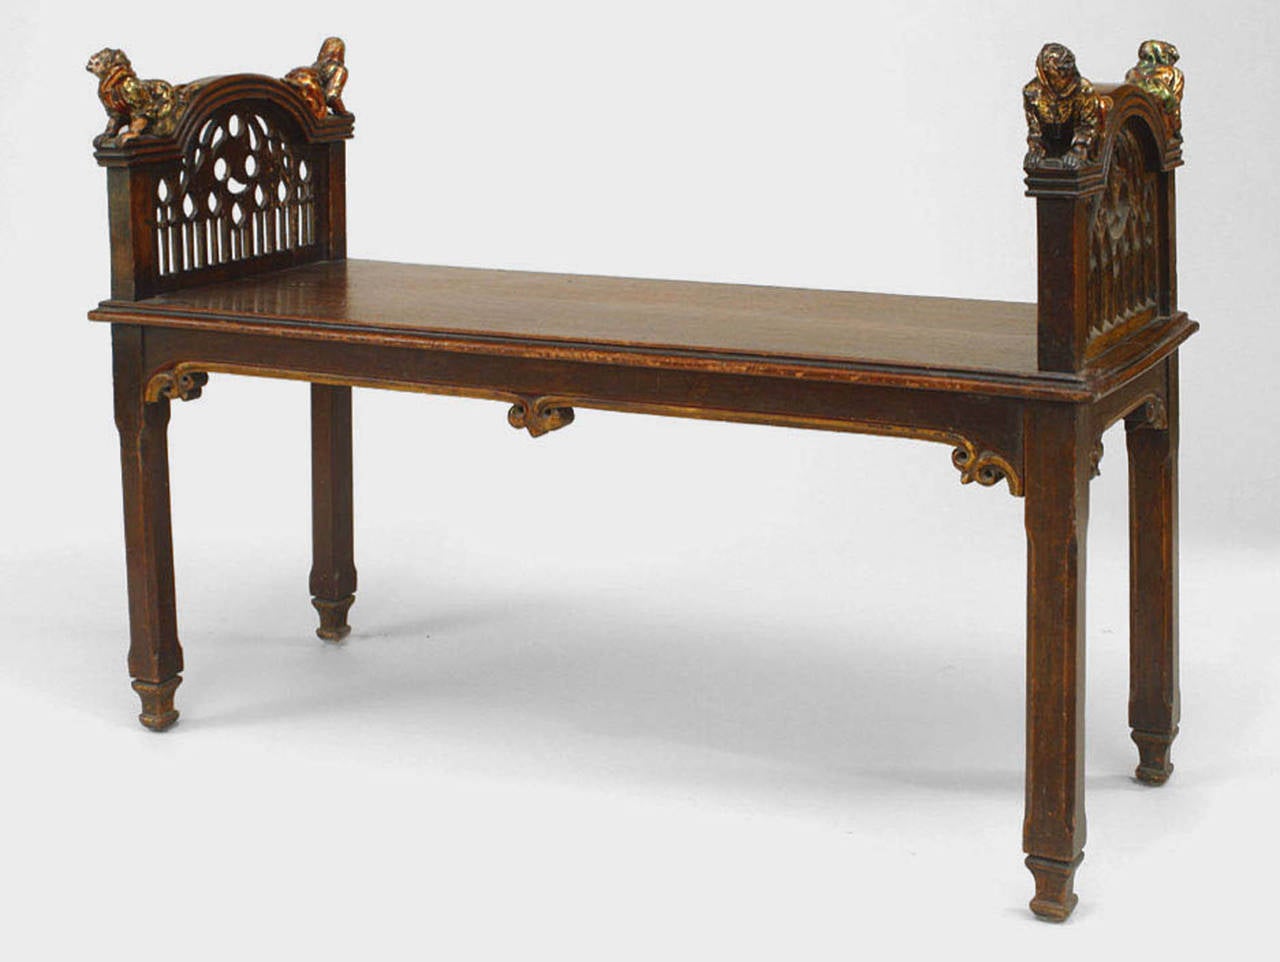 Nineteenth century English Gothic Revival walnut bench with filigree-carved sides and four polychromed reclining dwarf figures on each arm.